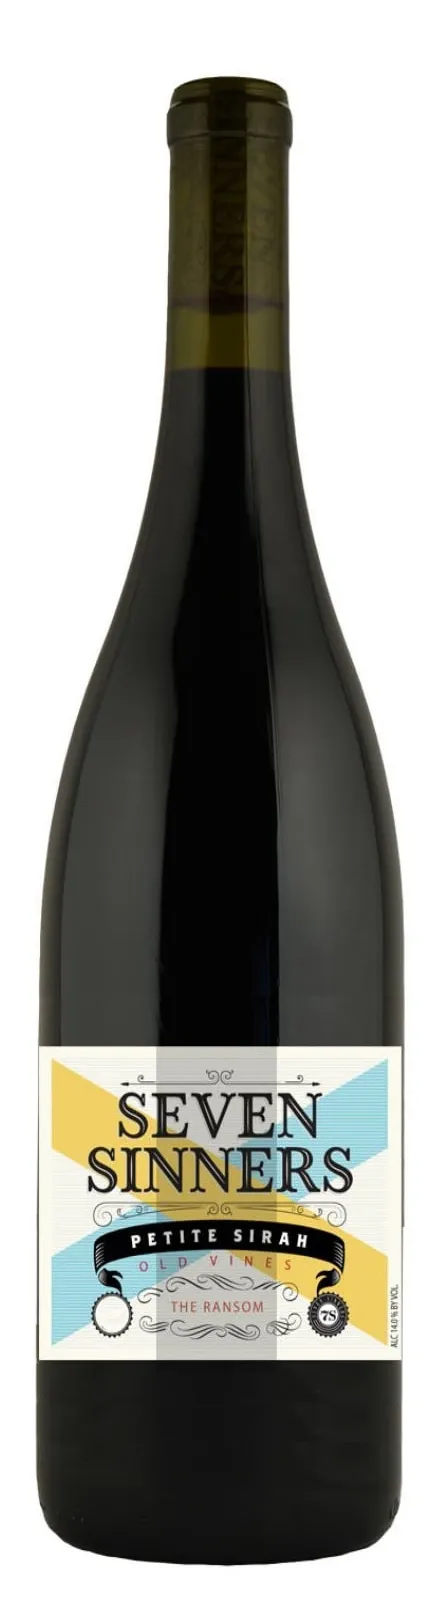 Bottle of Seven Sinners Petite Sirah (The Ransom) from search results